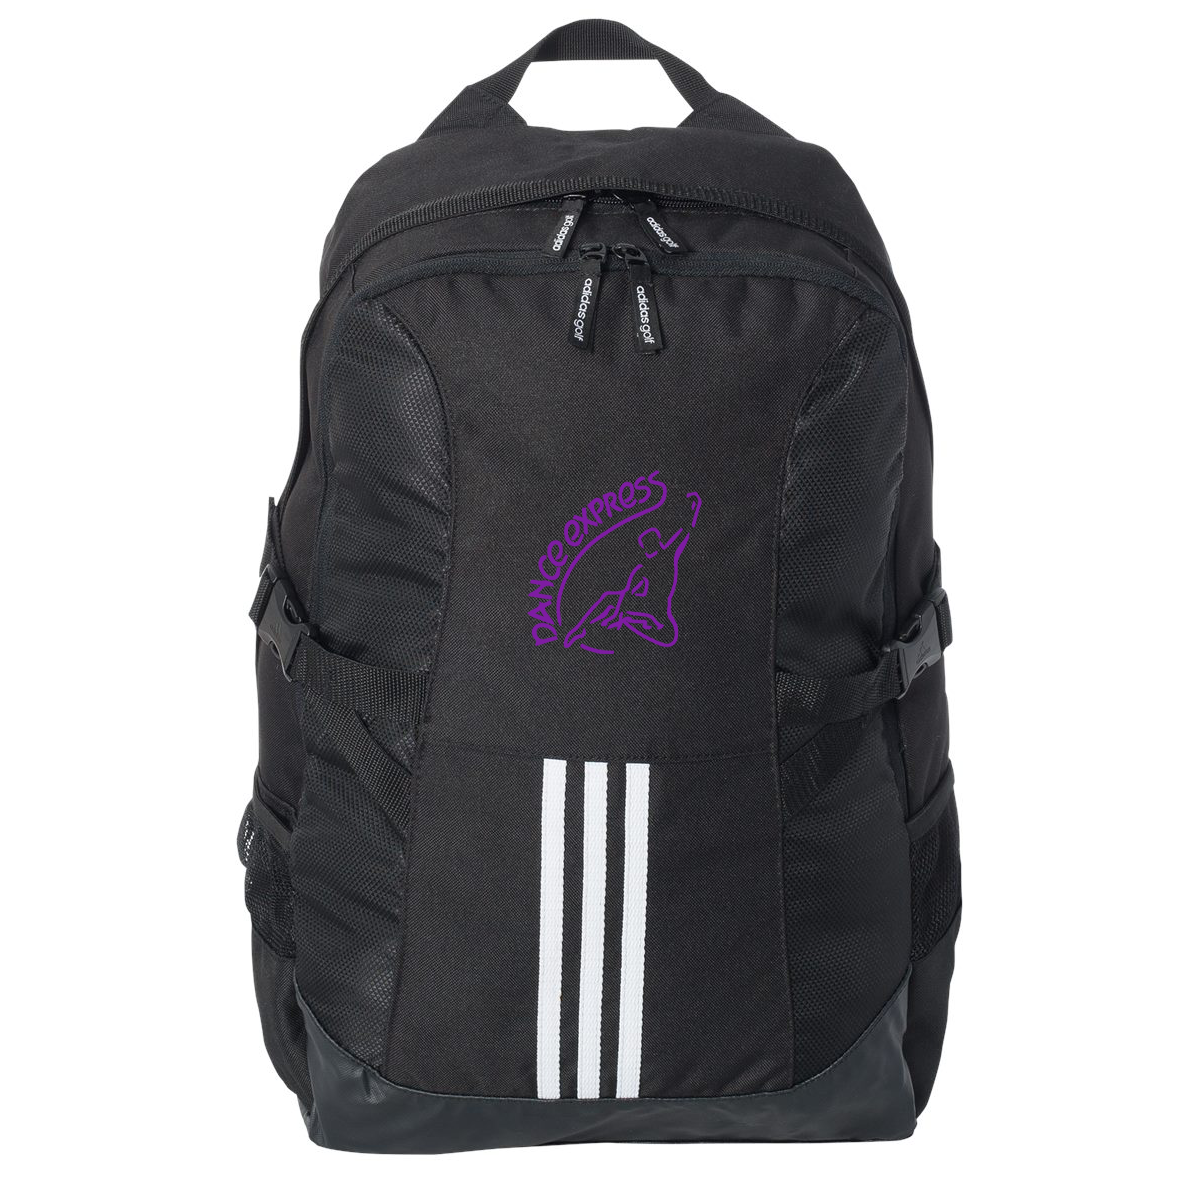 Dance Express of Tolland Adidas Backpack